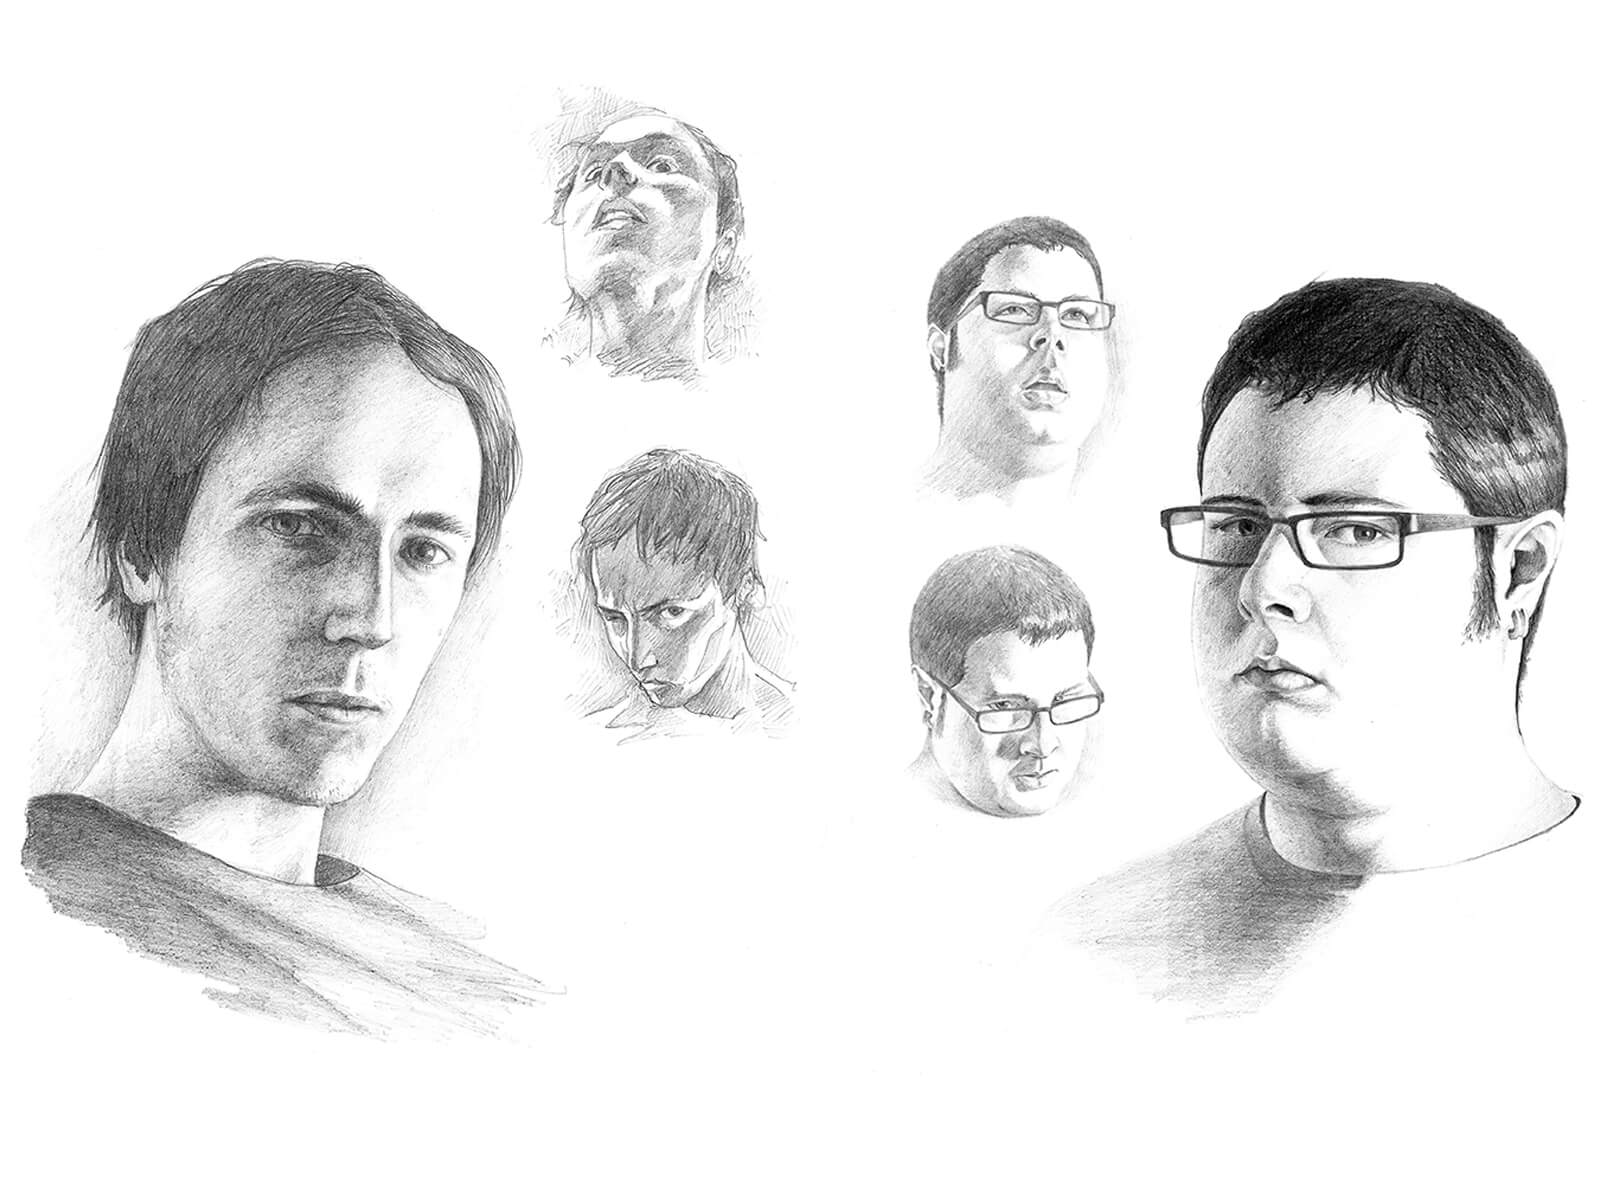 Black-and-white self portraits of two male artists&#039; faces from different angles, one wears glasses and two earrings.